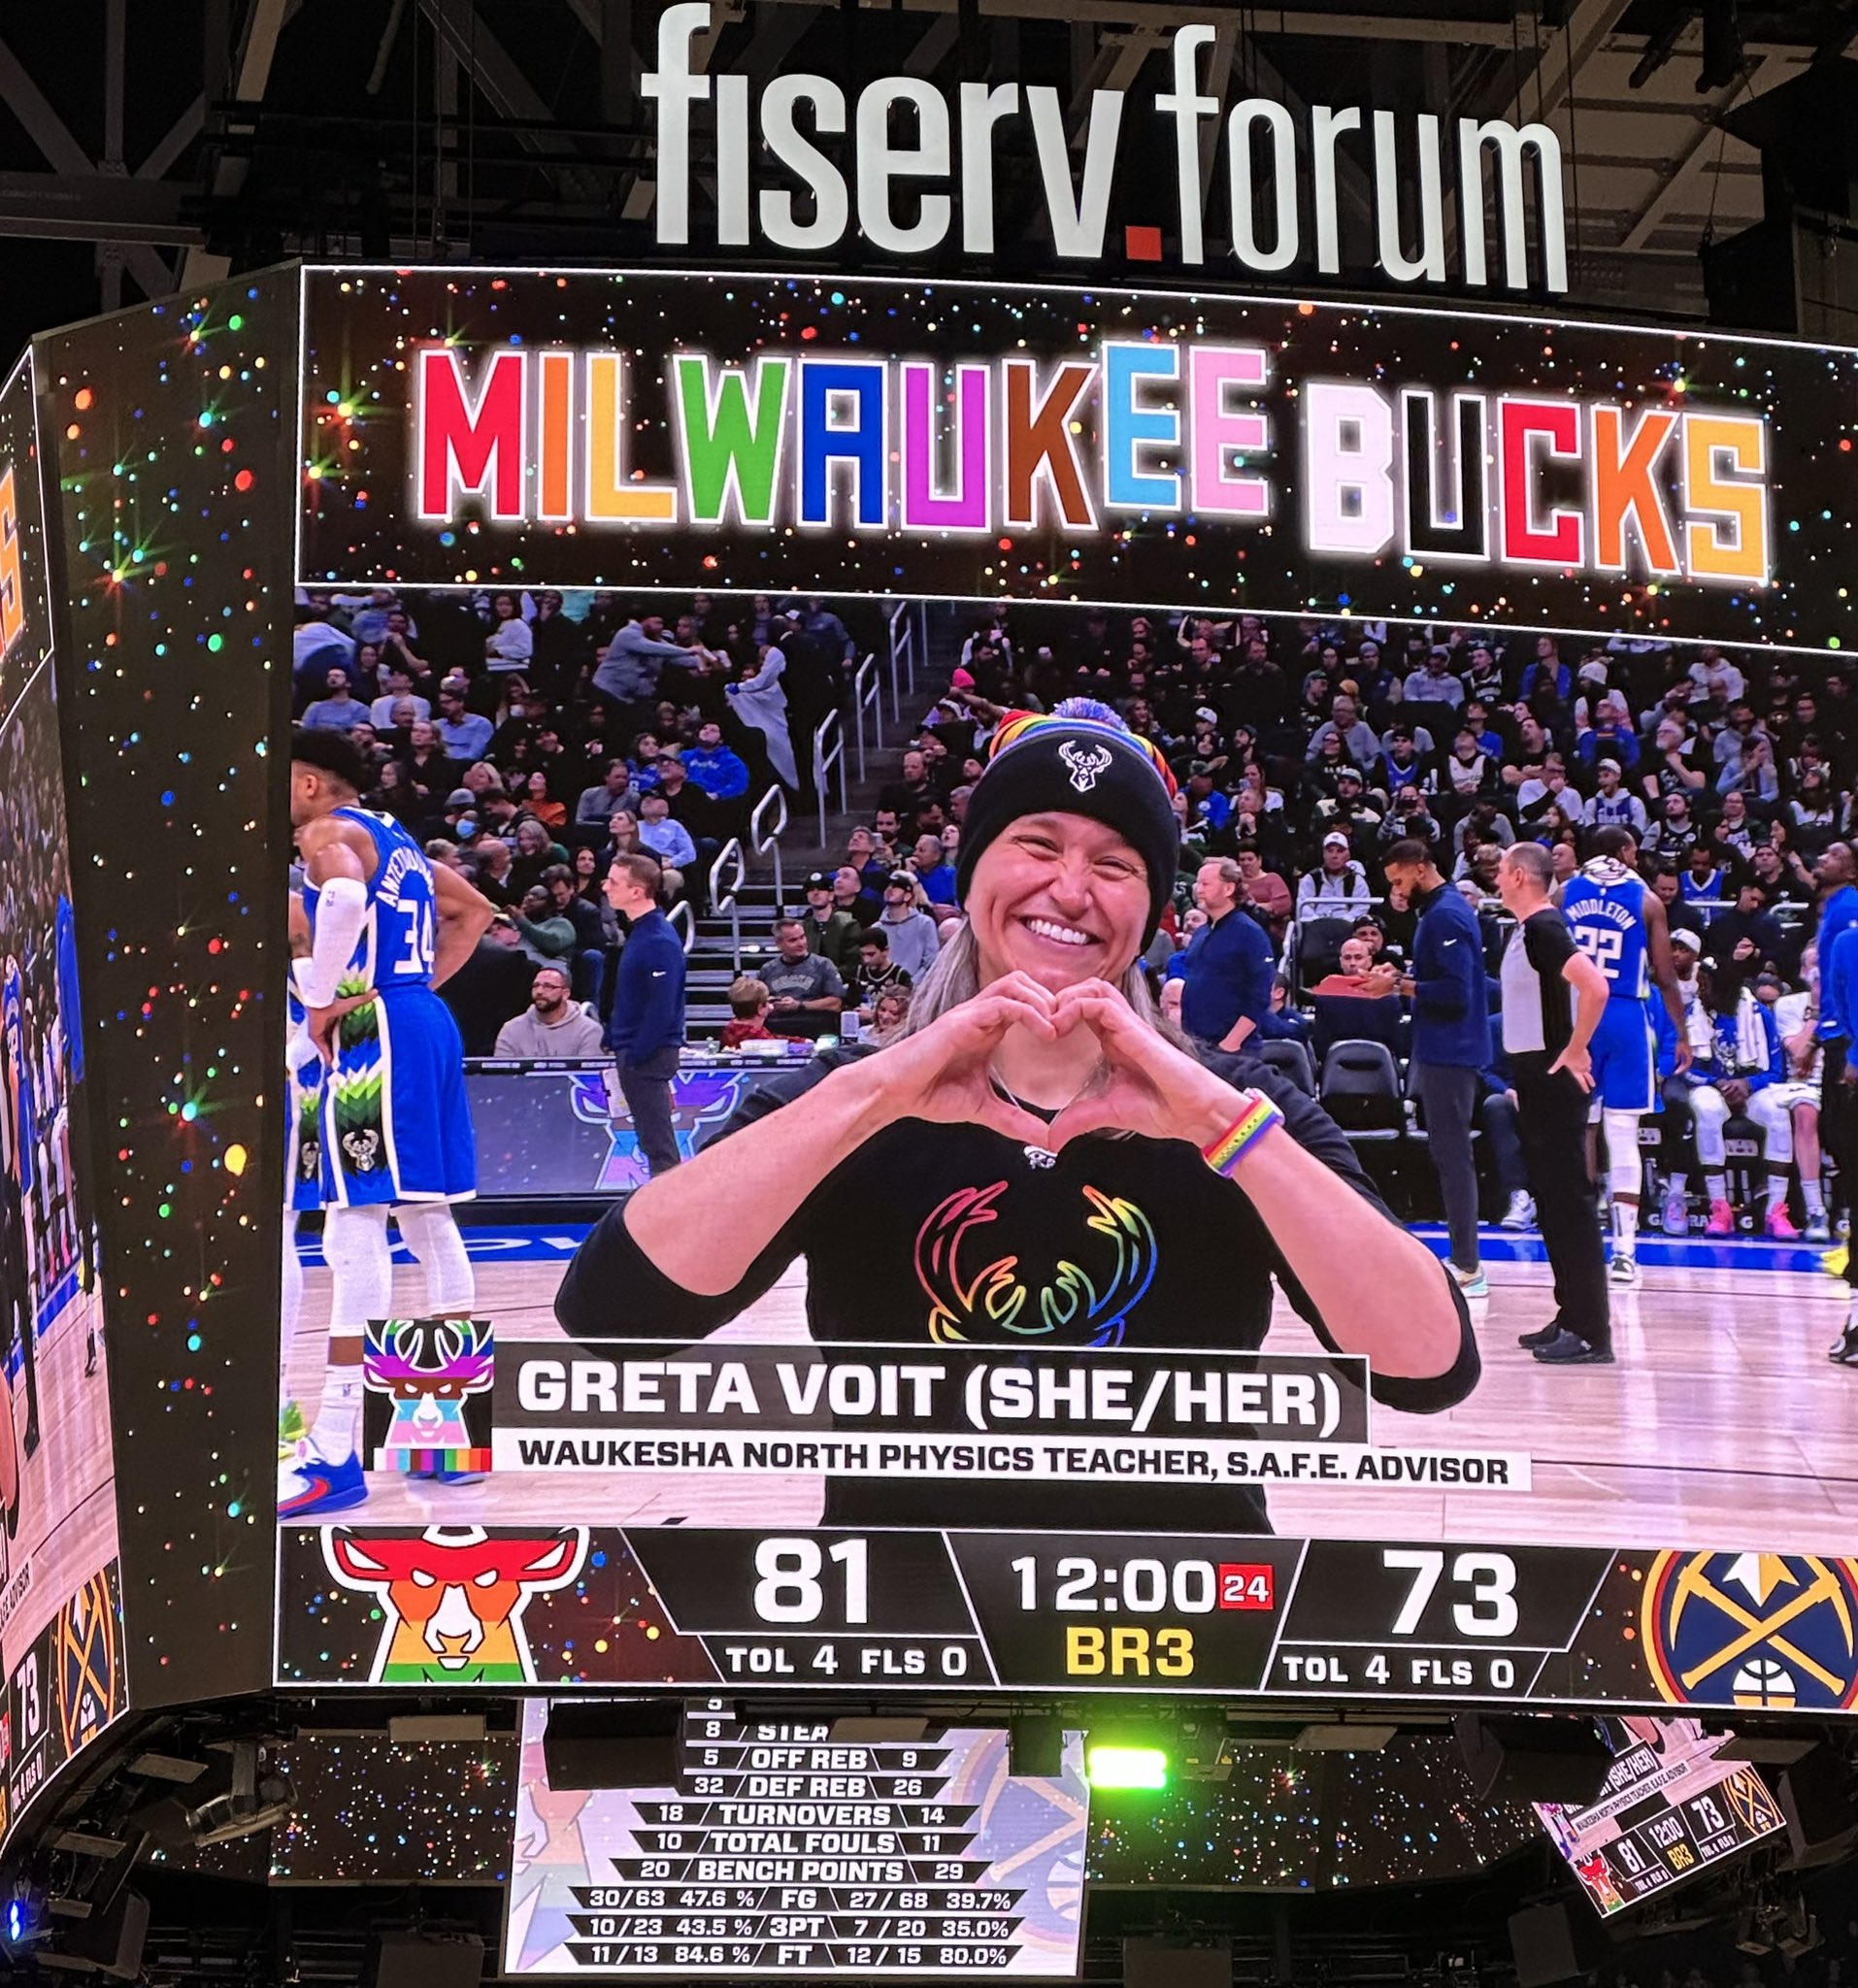 Which Halftime event by Milwaukee Bucks created dispute and concerns